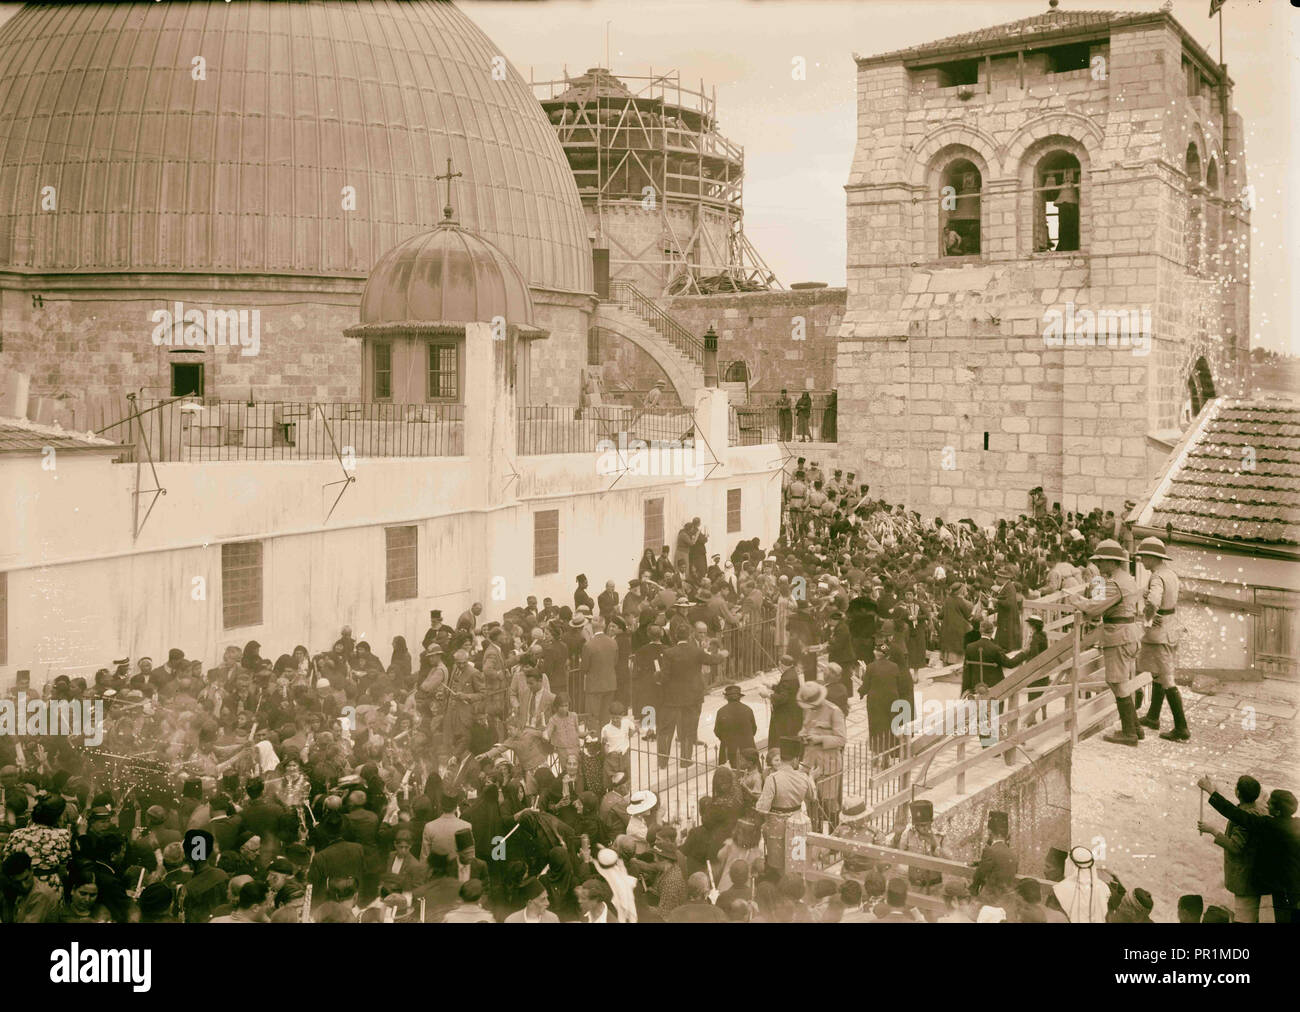 Ceremony of the Holy Fire taking place on the roof of the Greek convent showing domes of the Holy Sepulchre in the background Stock Photo